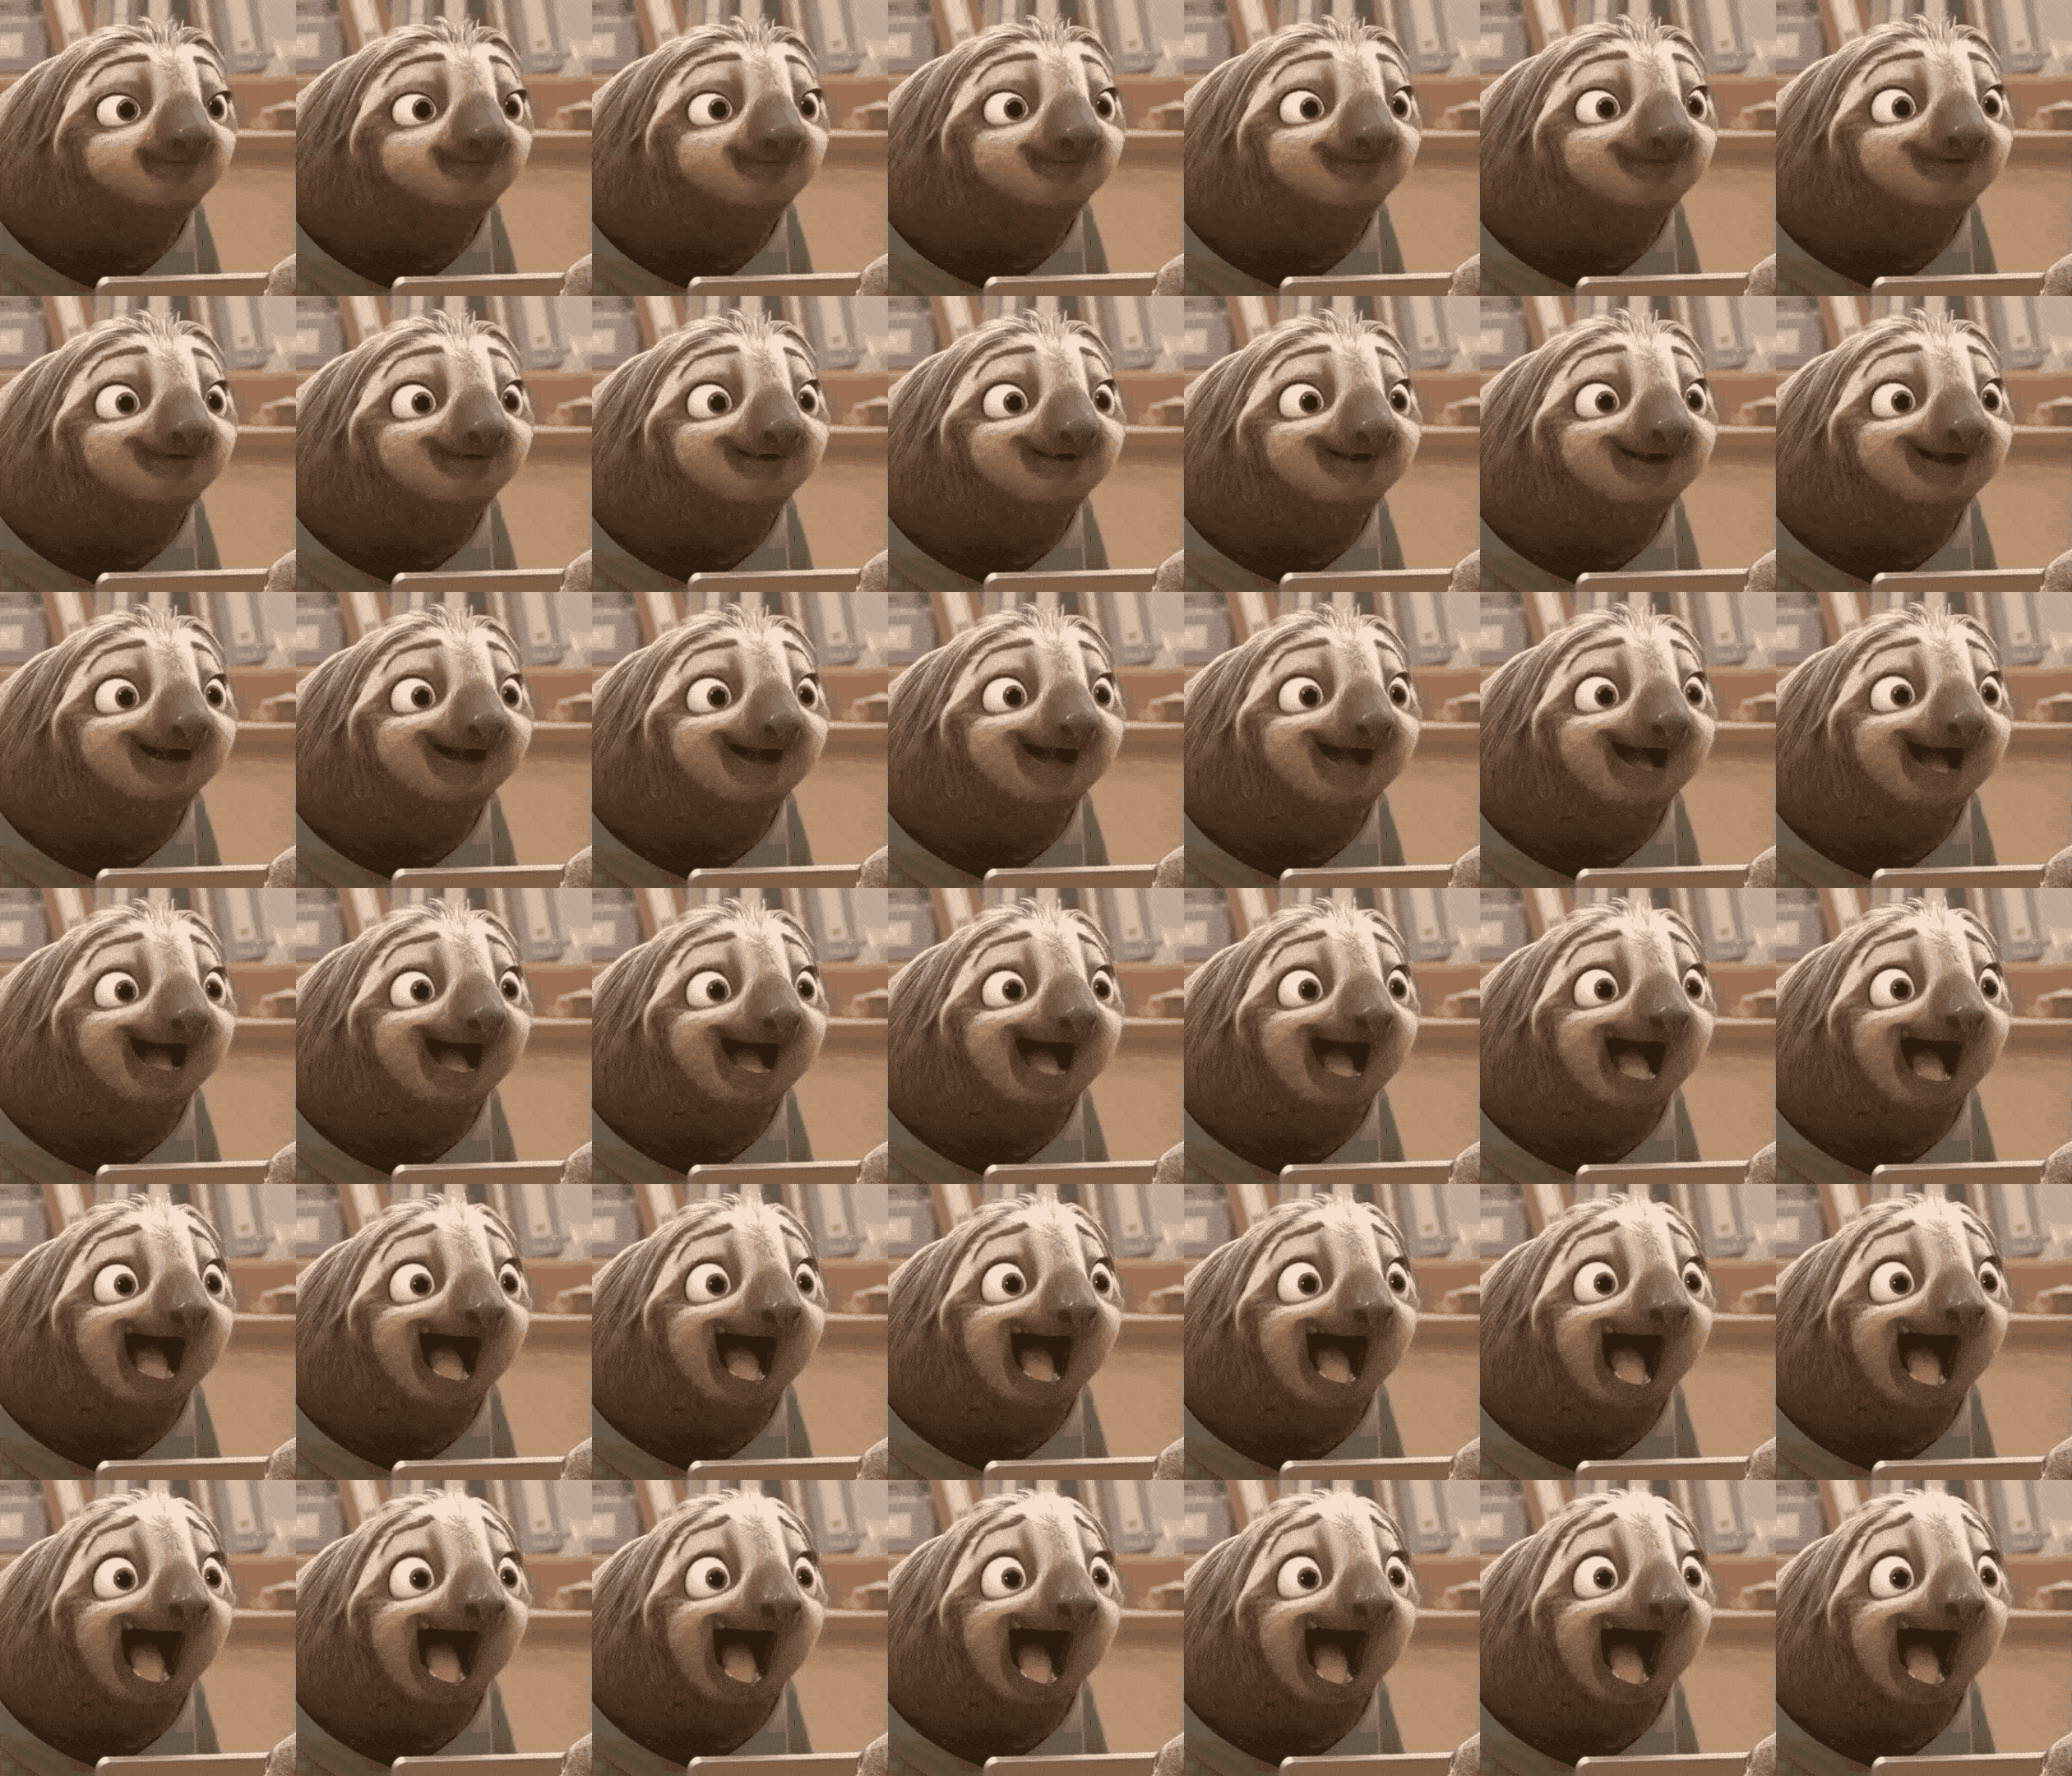 In this example, we create a sprite grid from a GIF of smiling Flash Slothmore from our favorite cartoon, Zootopia. Sloths are known to be very slow and it takes Flash 48 GIF frames to express his emotions. We split the GIF into individual frames and to make them fit in a 6-by-7 grid (6 rows and 7 columns), we remove 6 frames from the animation. The removed frames are every 9th frame (frames 1, 9, 18, 27, 45). GIF source: Tenor.